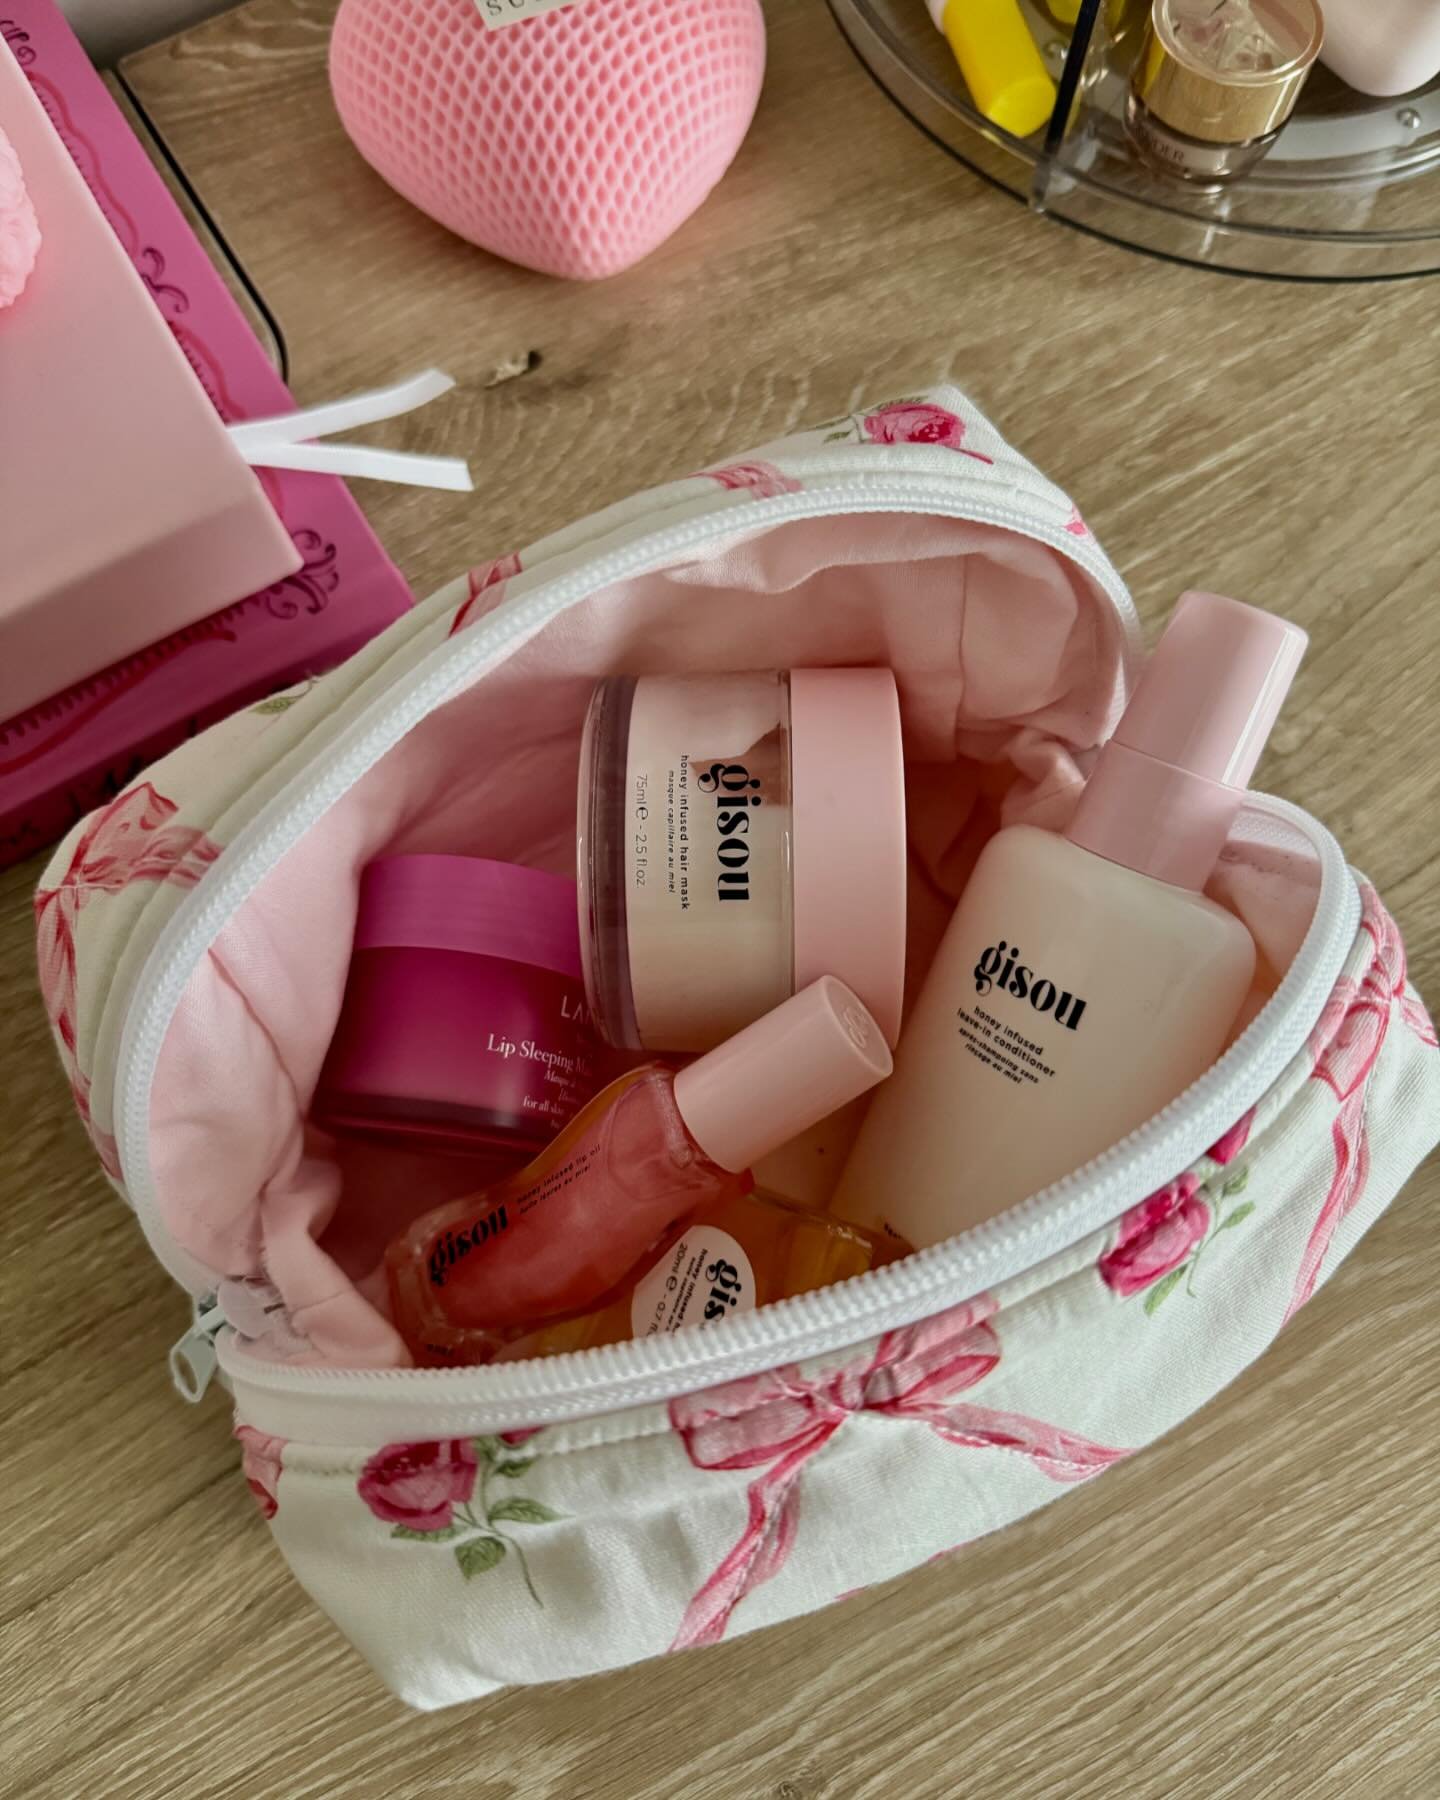 What&rsquo;s in my beauty bag🎀🧸💓🩰

#beautybags #makeupbags #cosmeticbags #handcrafted #handcraftedbags #handmade #handmadegifts #smallbusinessgrowth #handmadebeauty #makeuppouch #beautyonthego #beautyineverybag #makeuporganizer #customecosmeticba